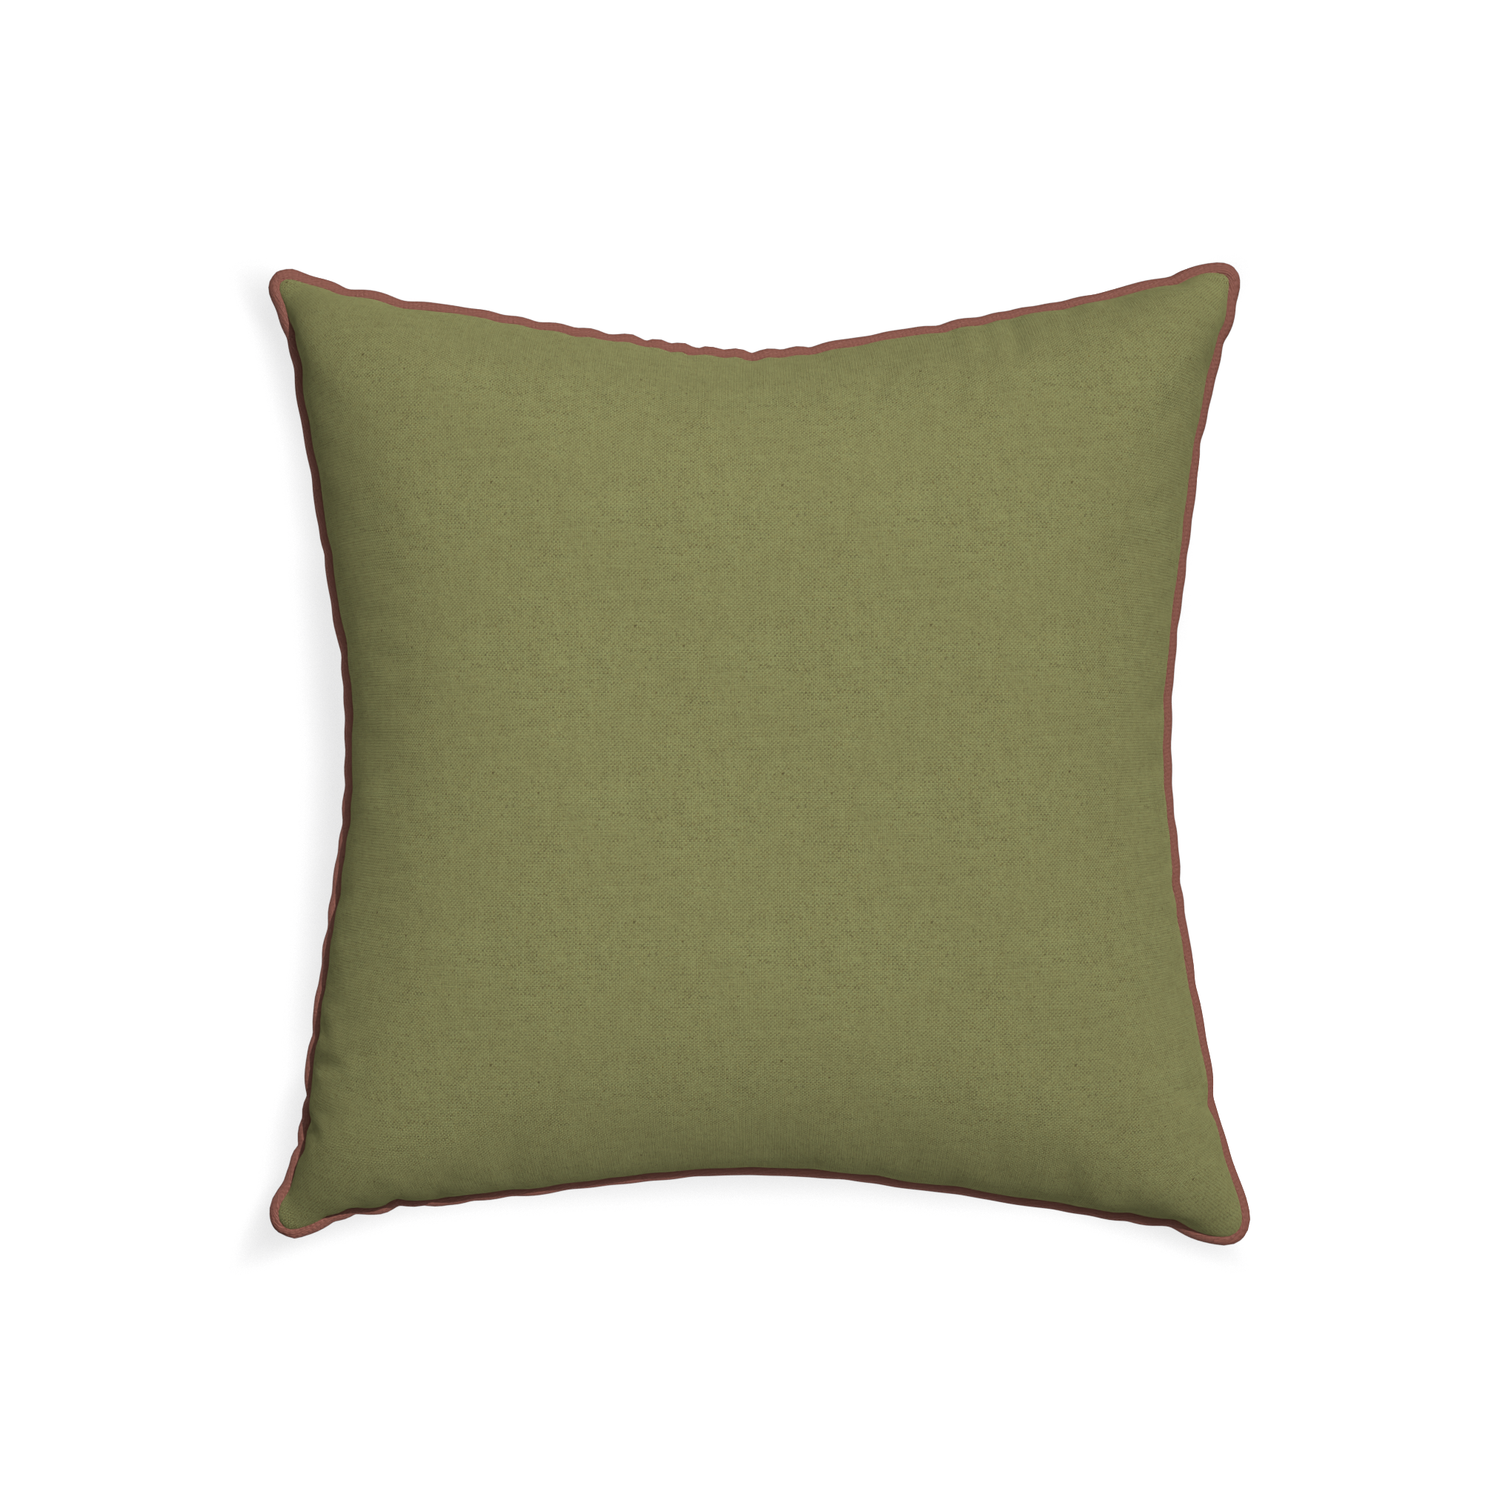 22-square moss custom moss greenpillow with w piping on white background